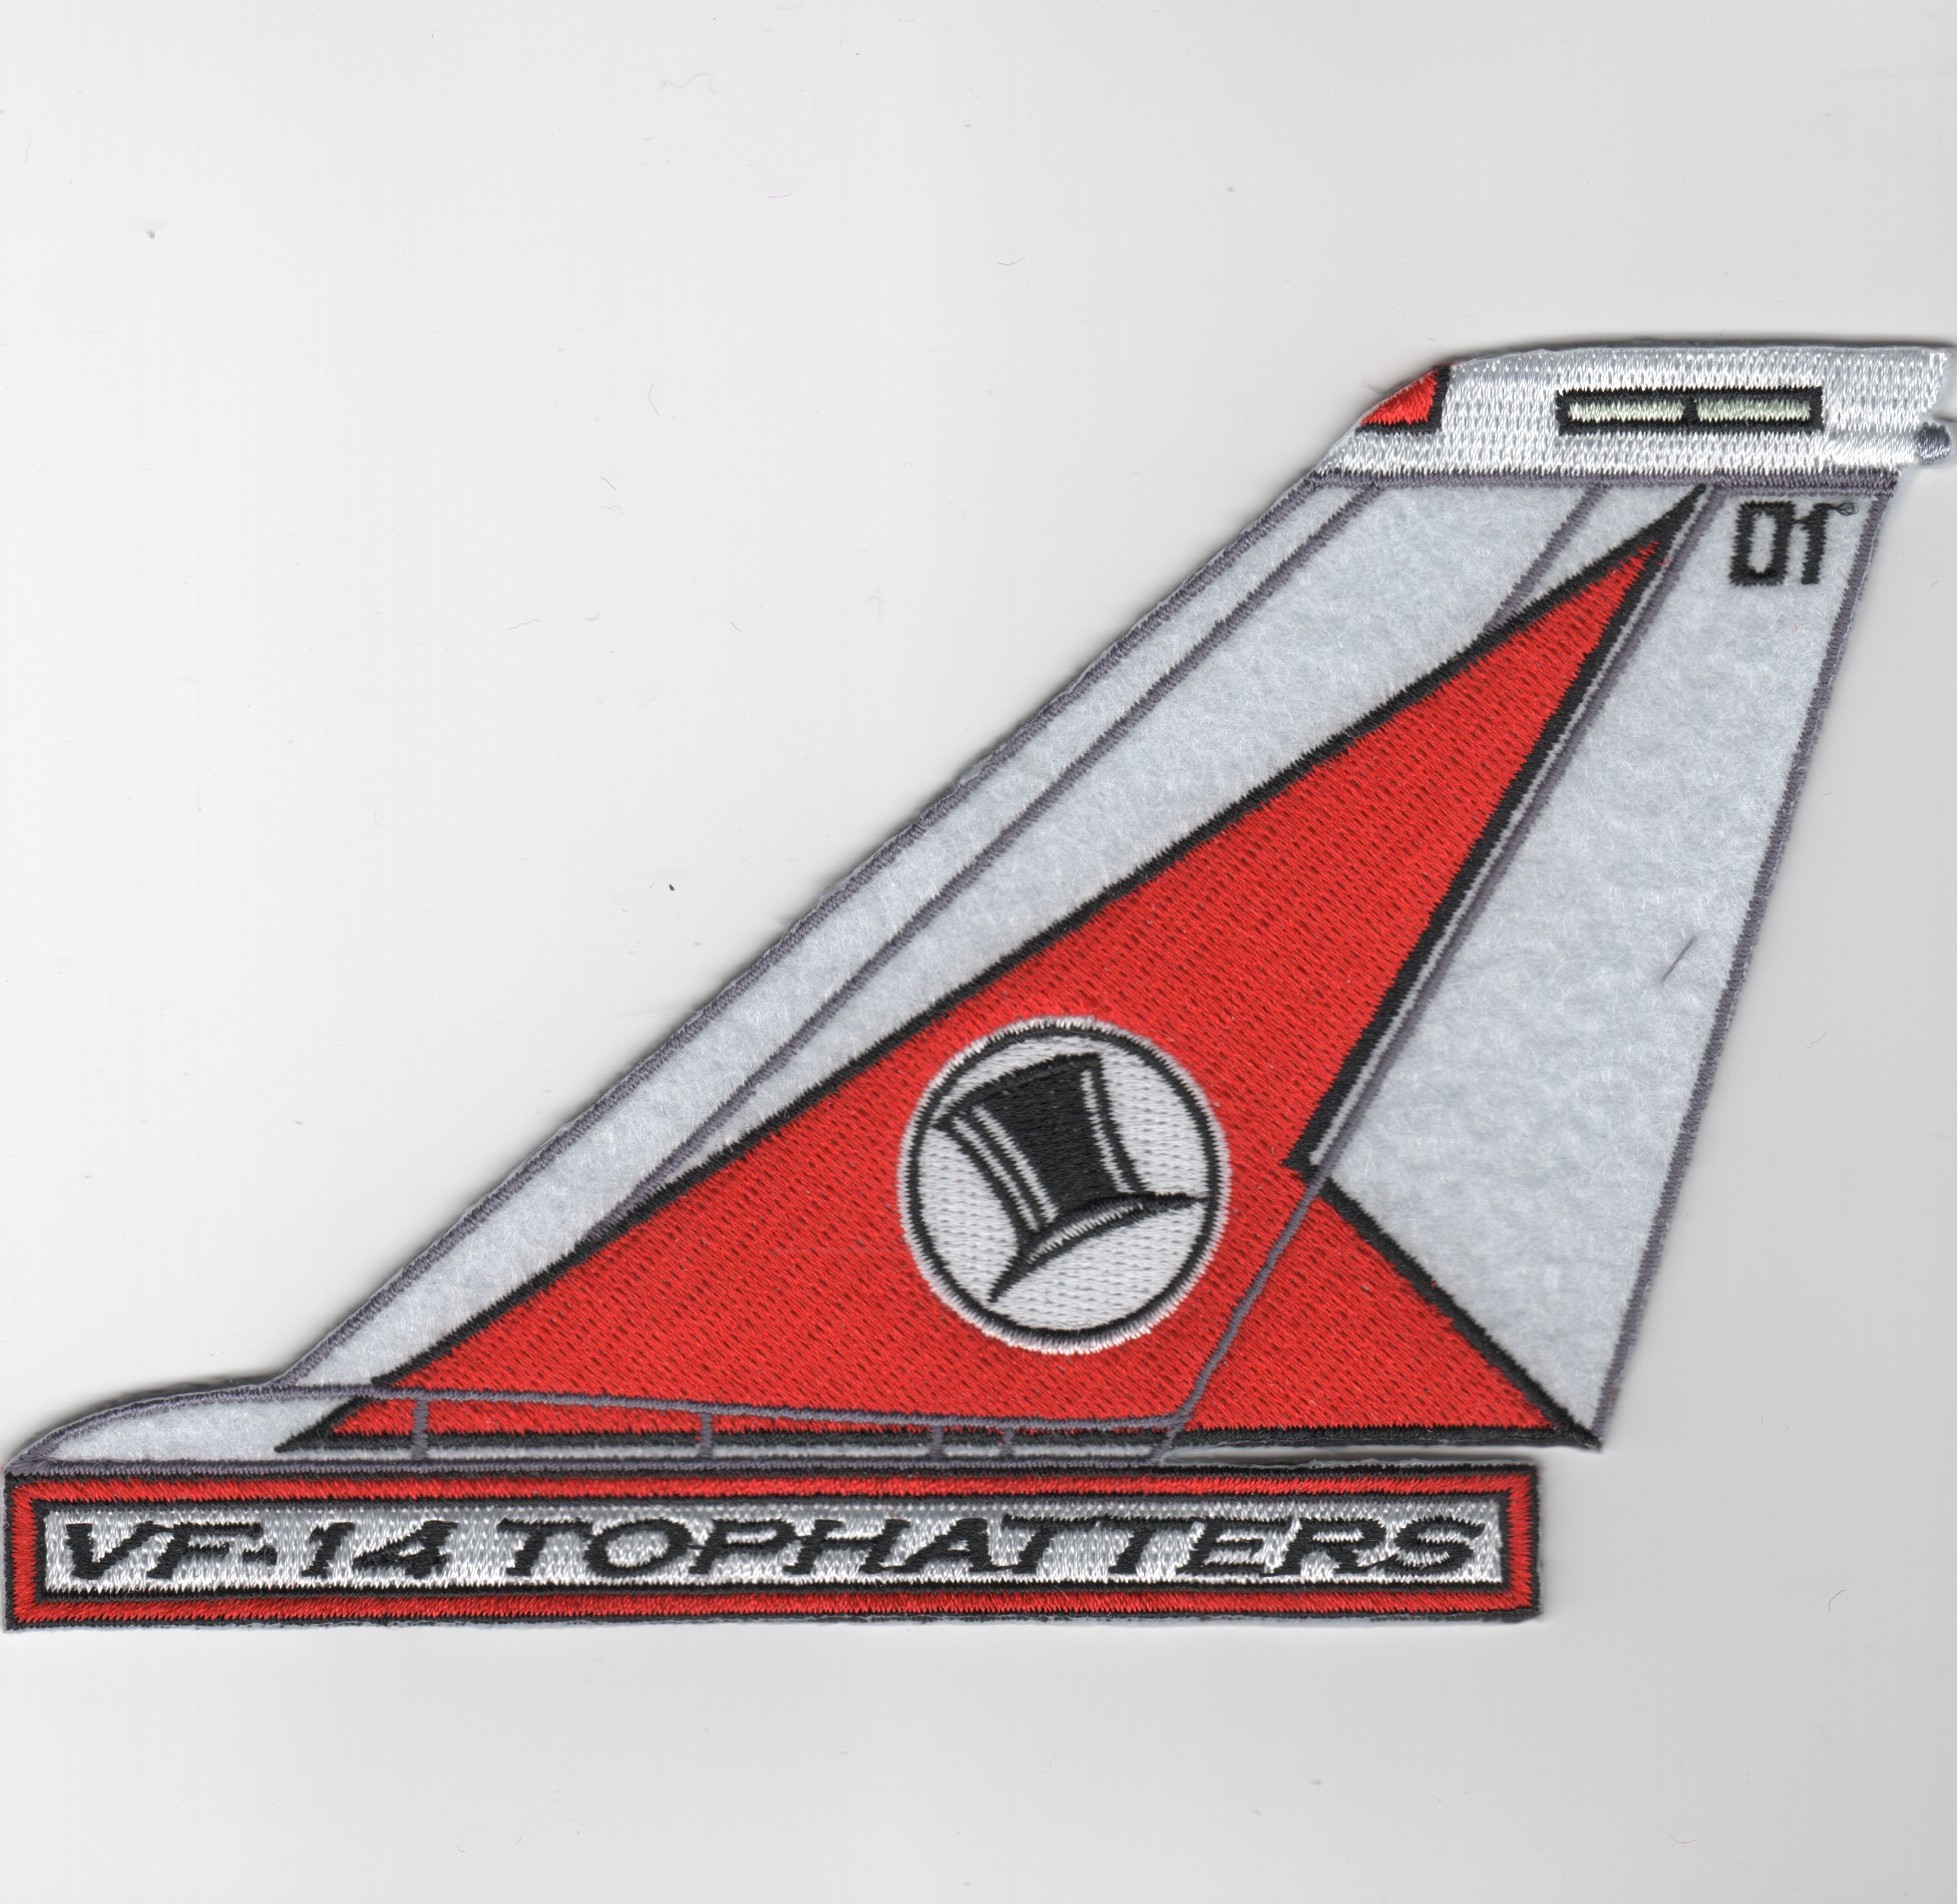 VF-14 F-14 Tomcat Tail Fin (Red/White/Text)